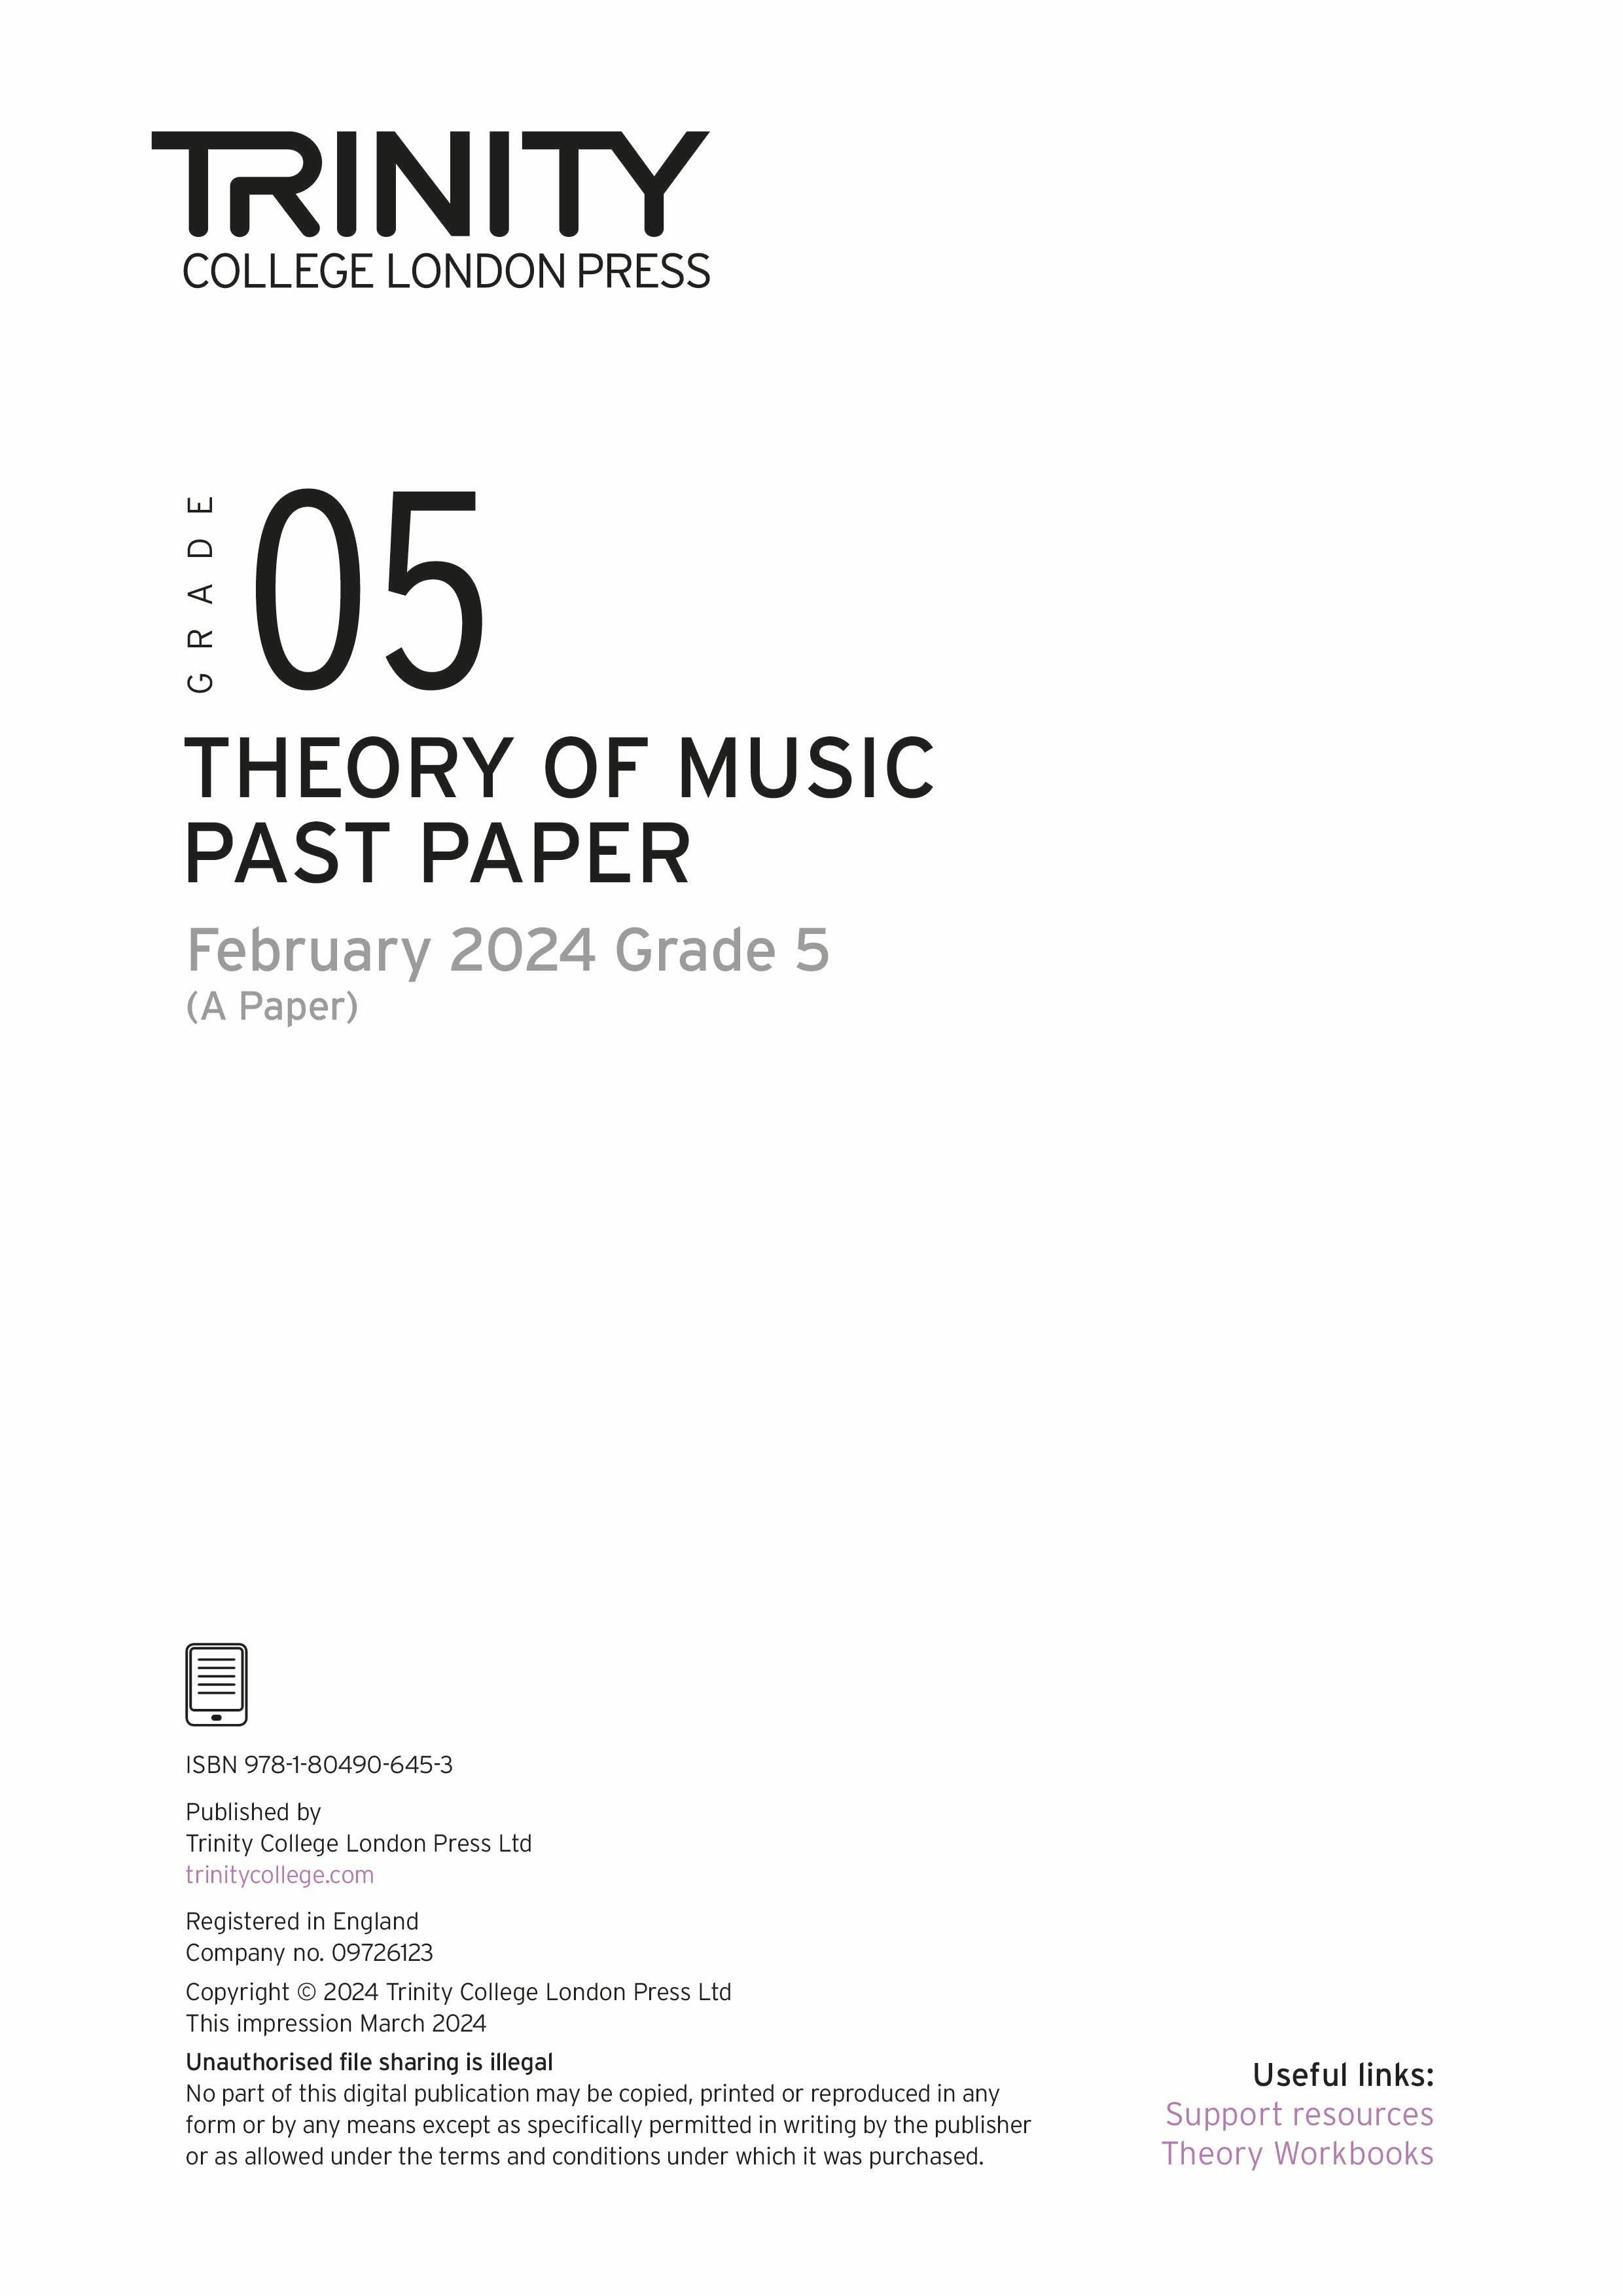 Theory of Music Past Paper 2024 February A: Grade 5 - ebook